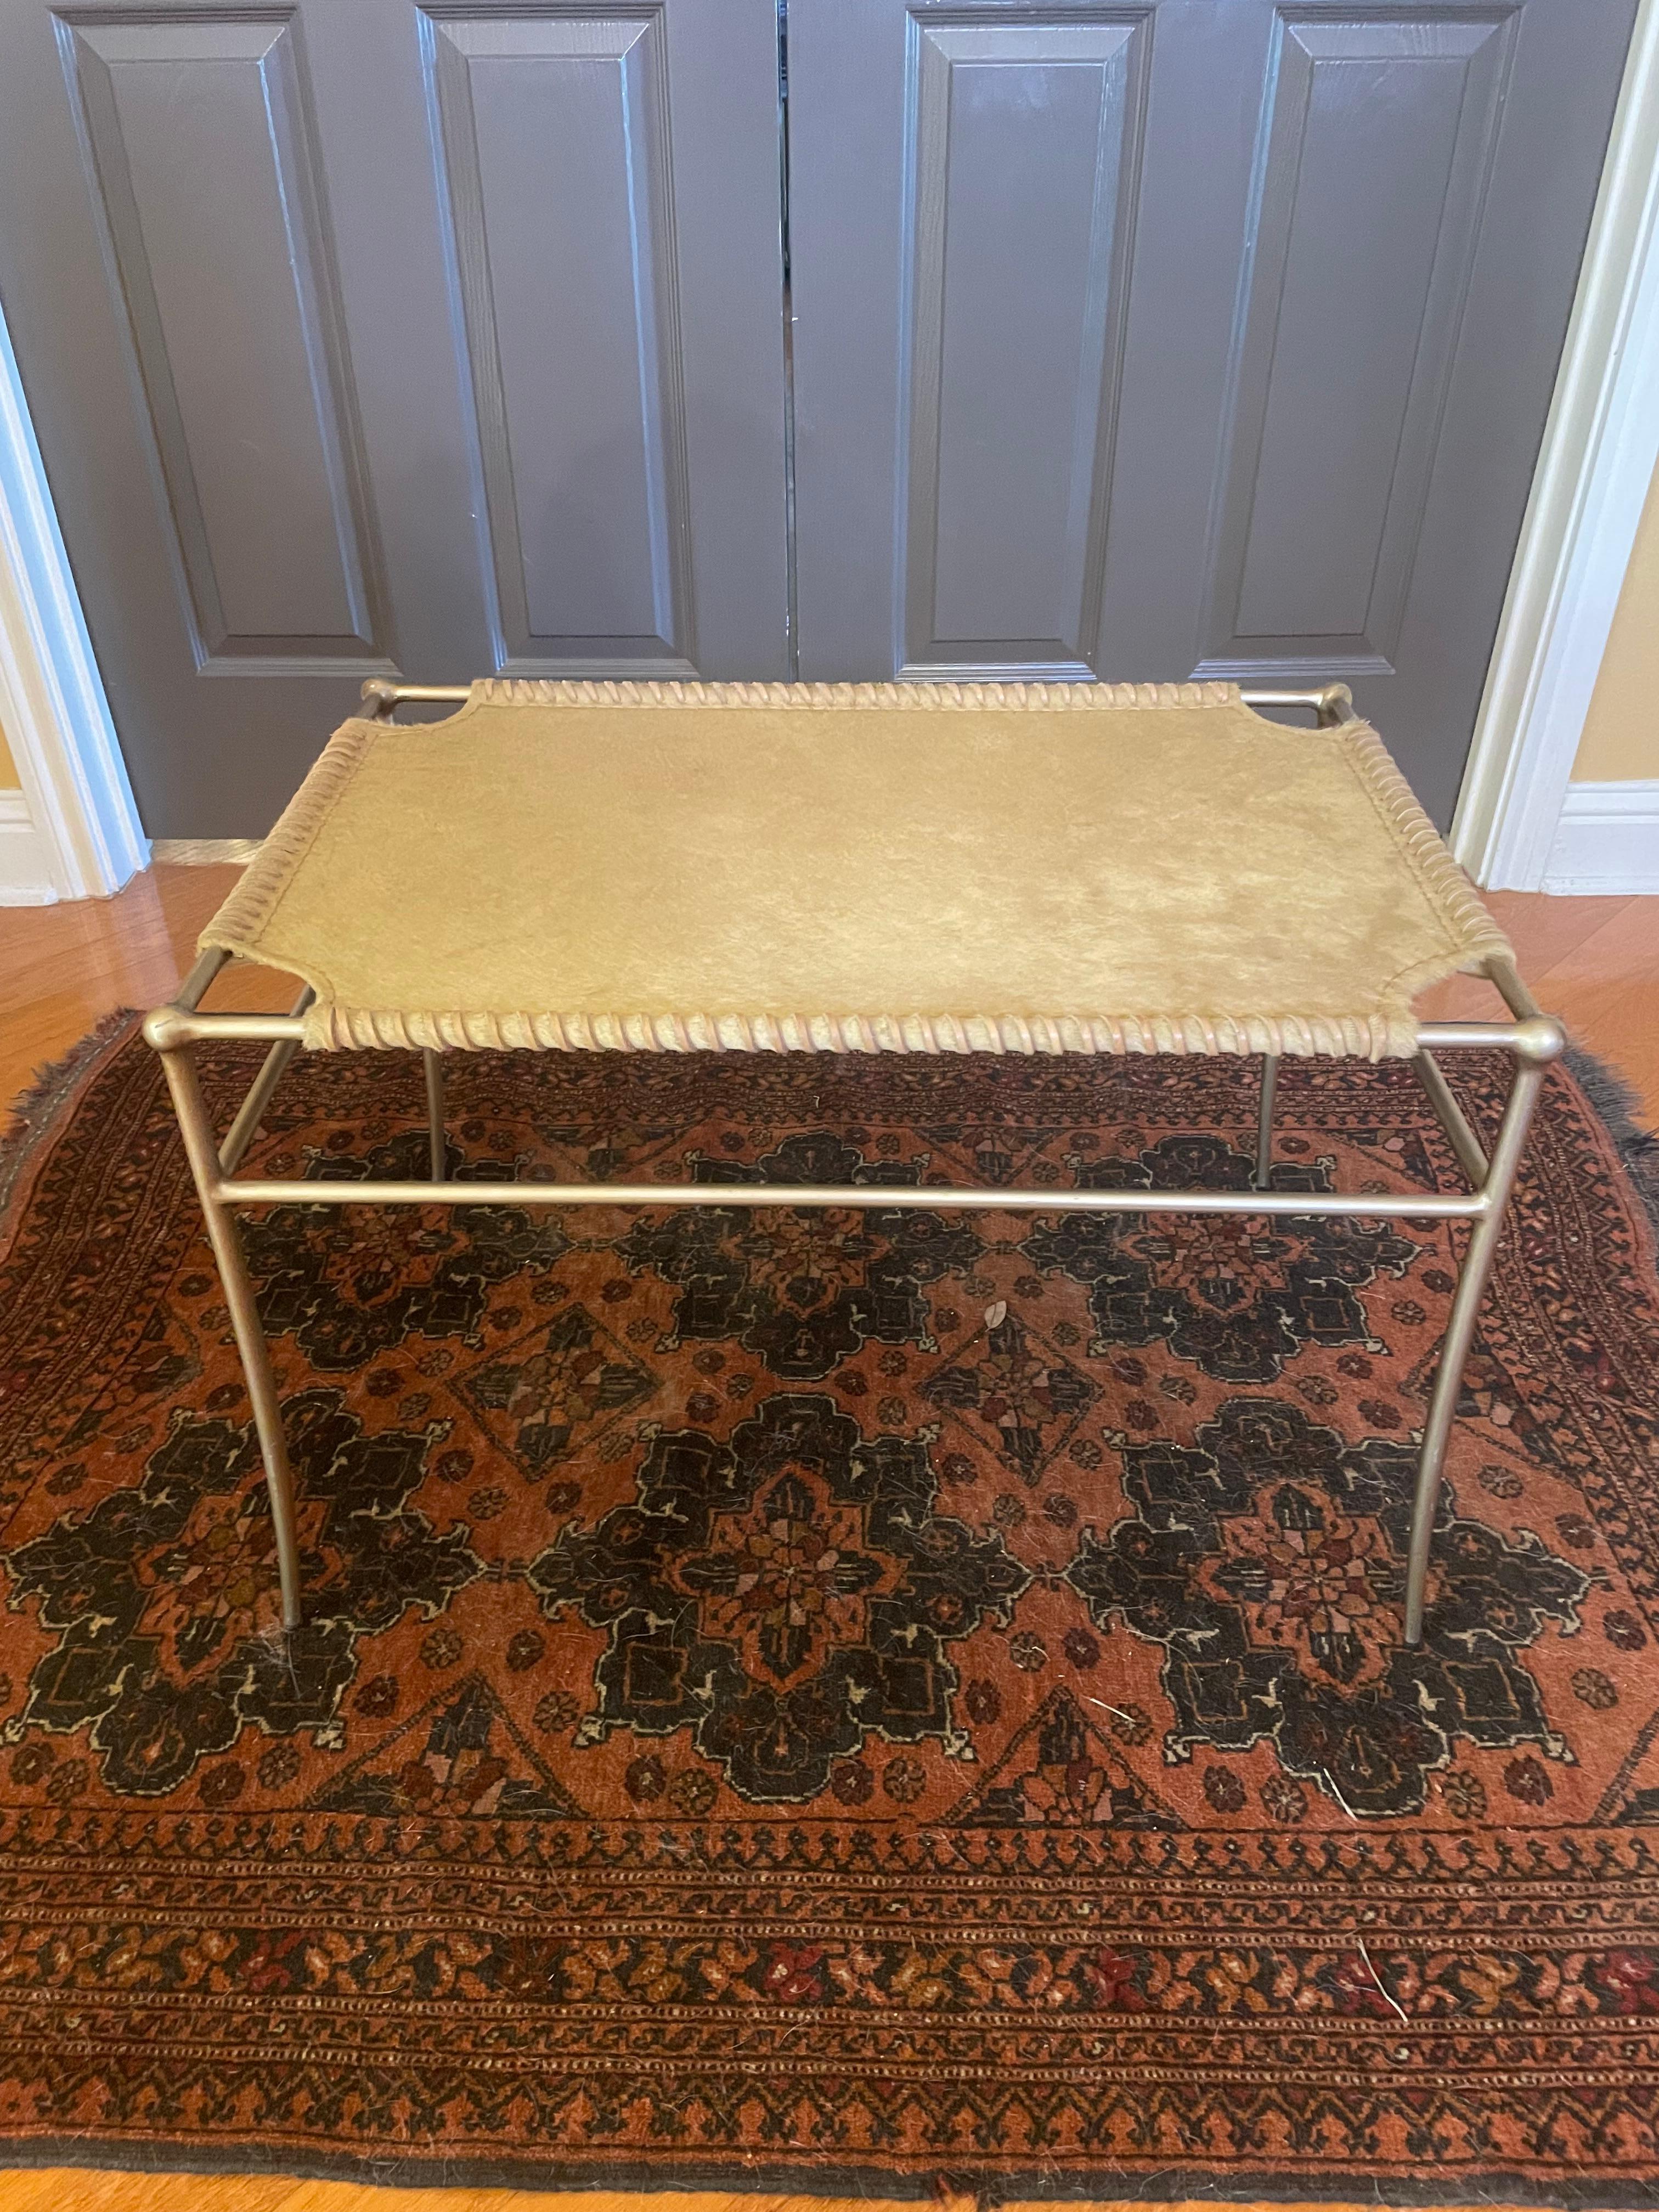 Umber-Colored Hide, Leather and Brass Bench For Sale 4